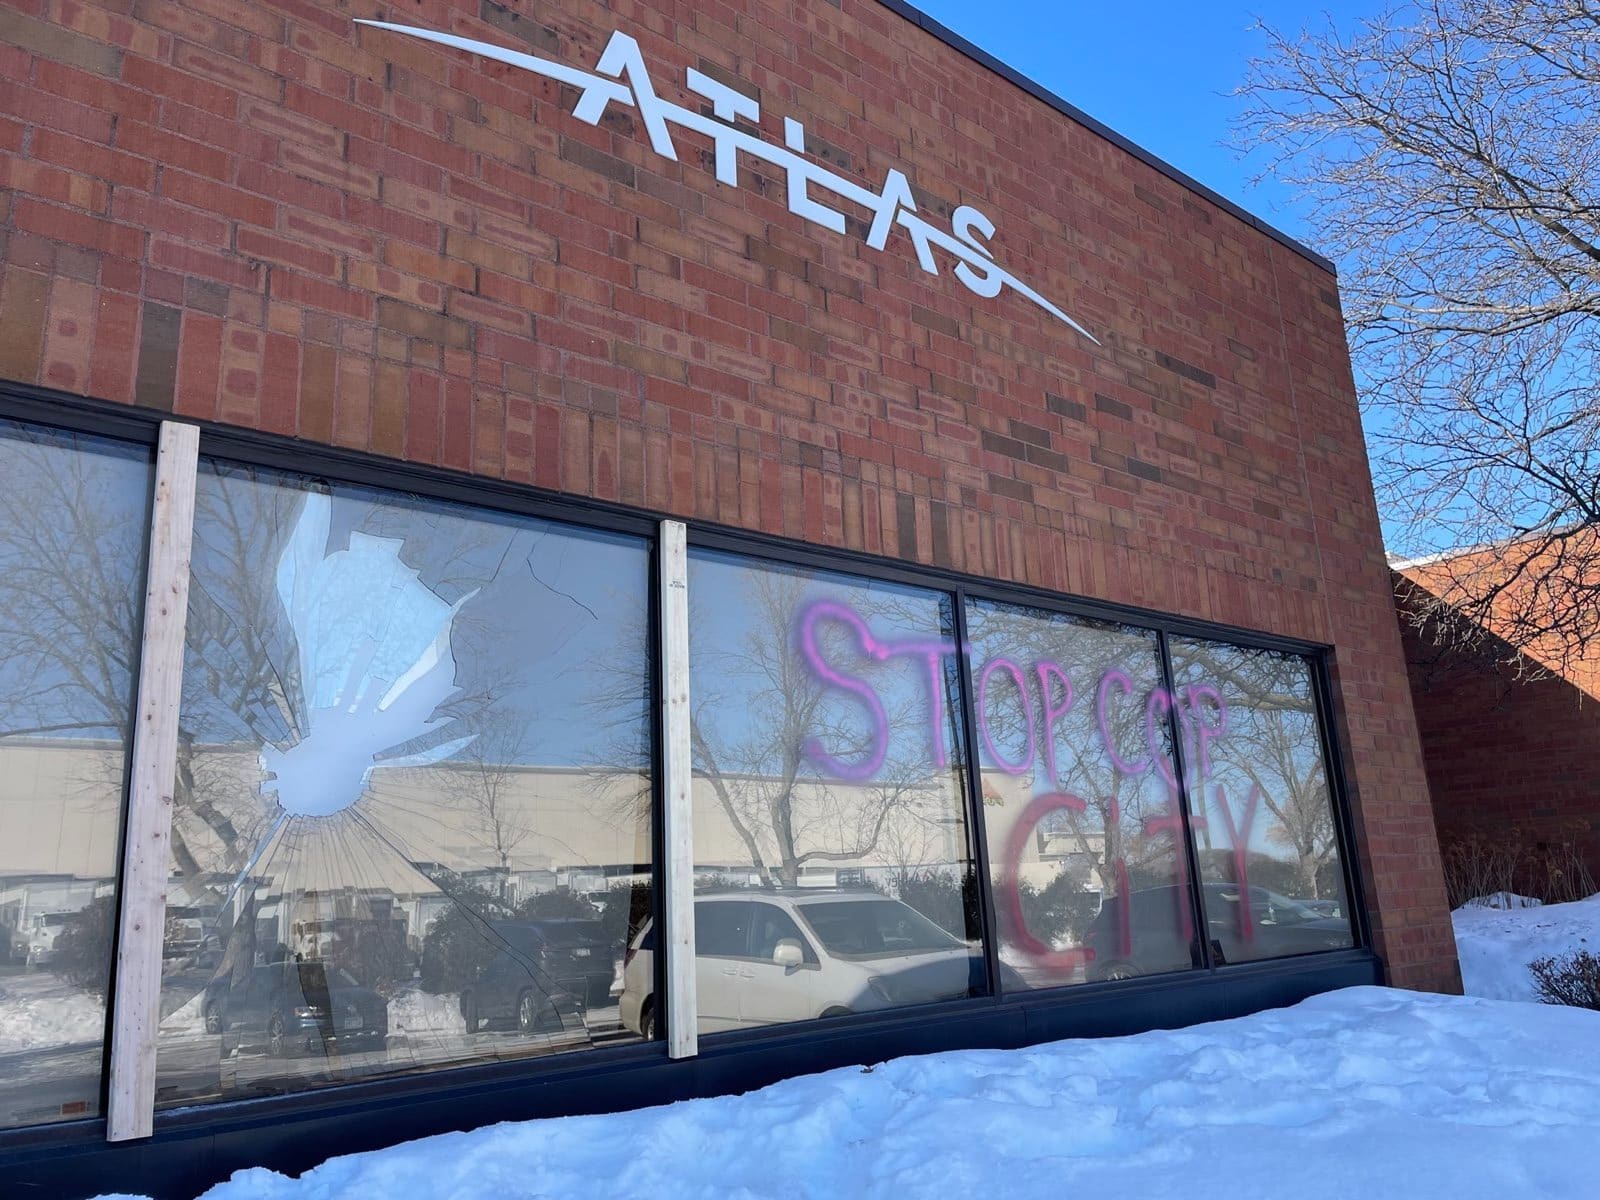 (Claim / Anonymous Anarchist) American Anarchists Vandalised the Atlas Office, in Solidarity with the Atlanta Forest Defenders, in Fridley, Minnesota, United States - 30 January 2023